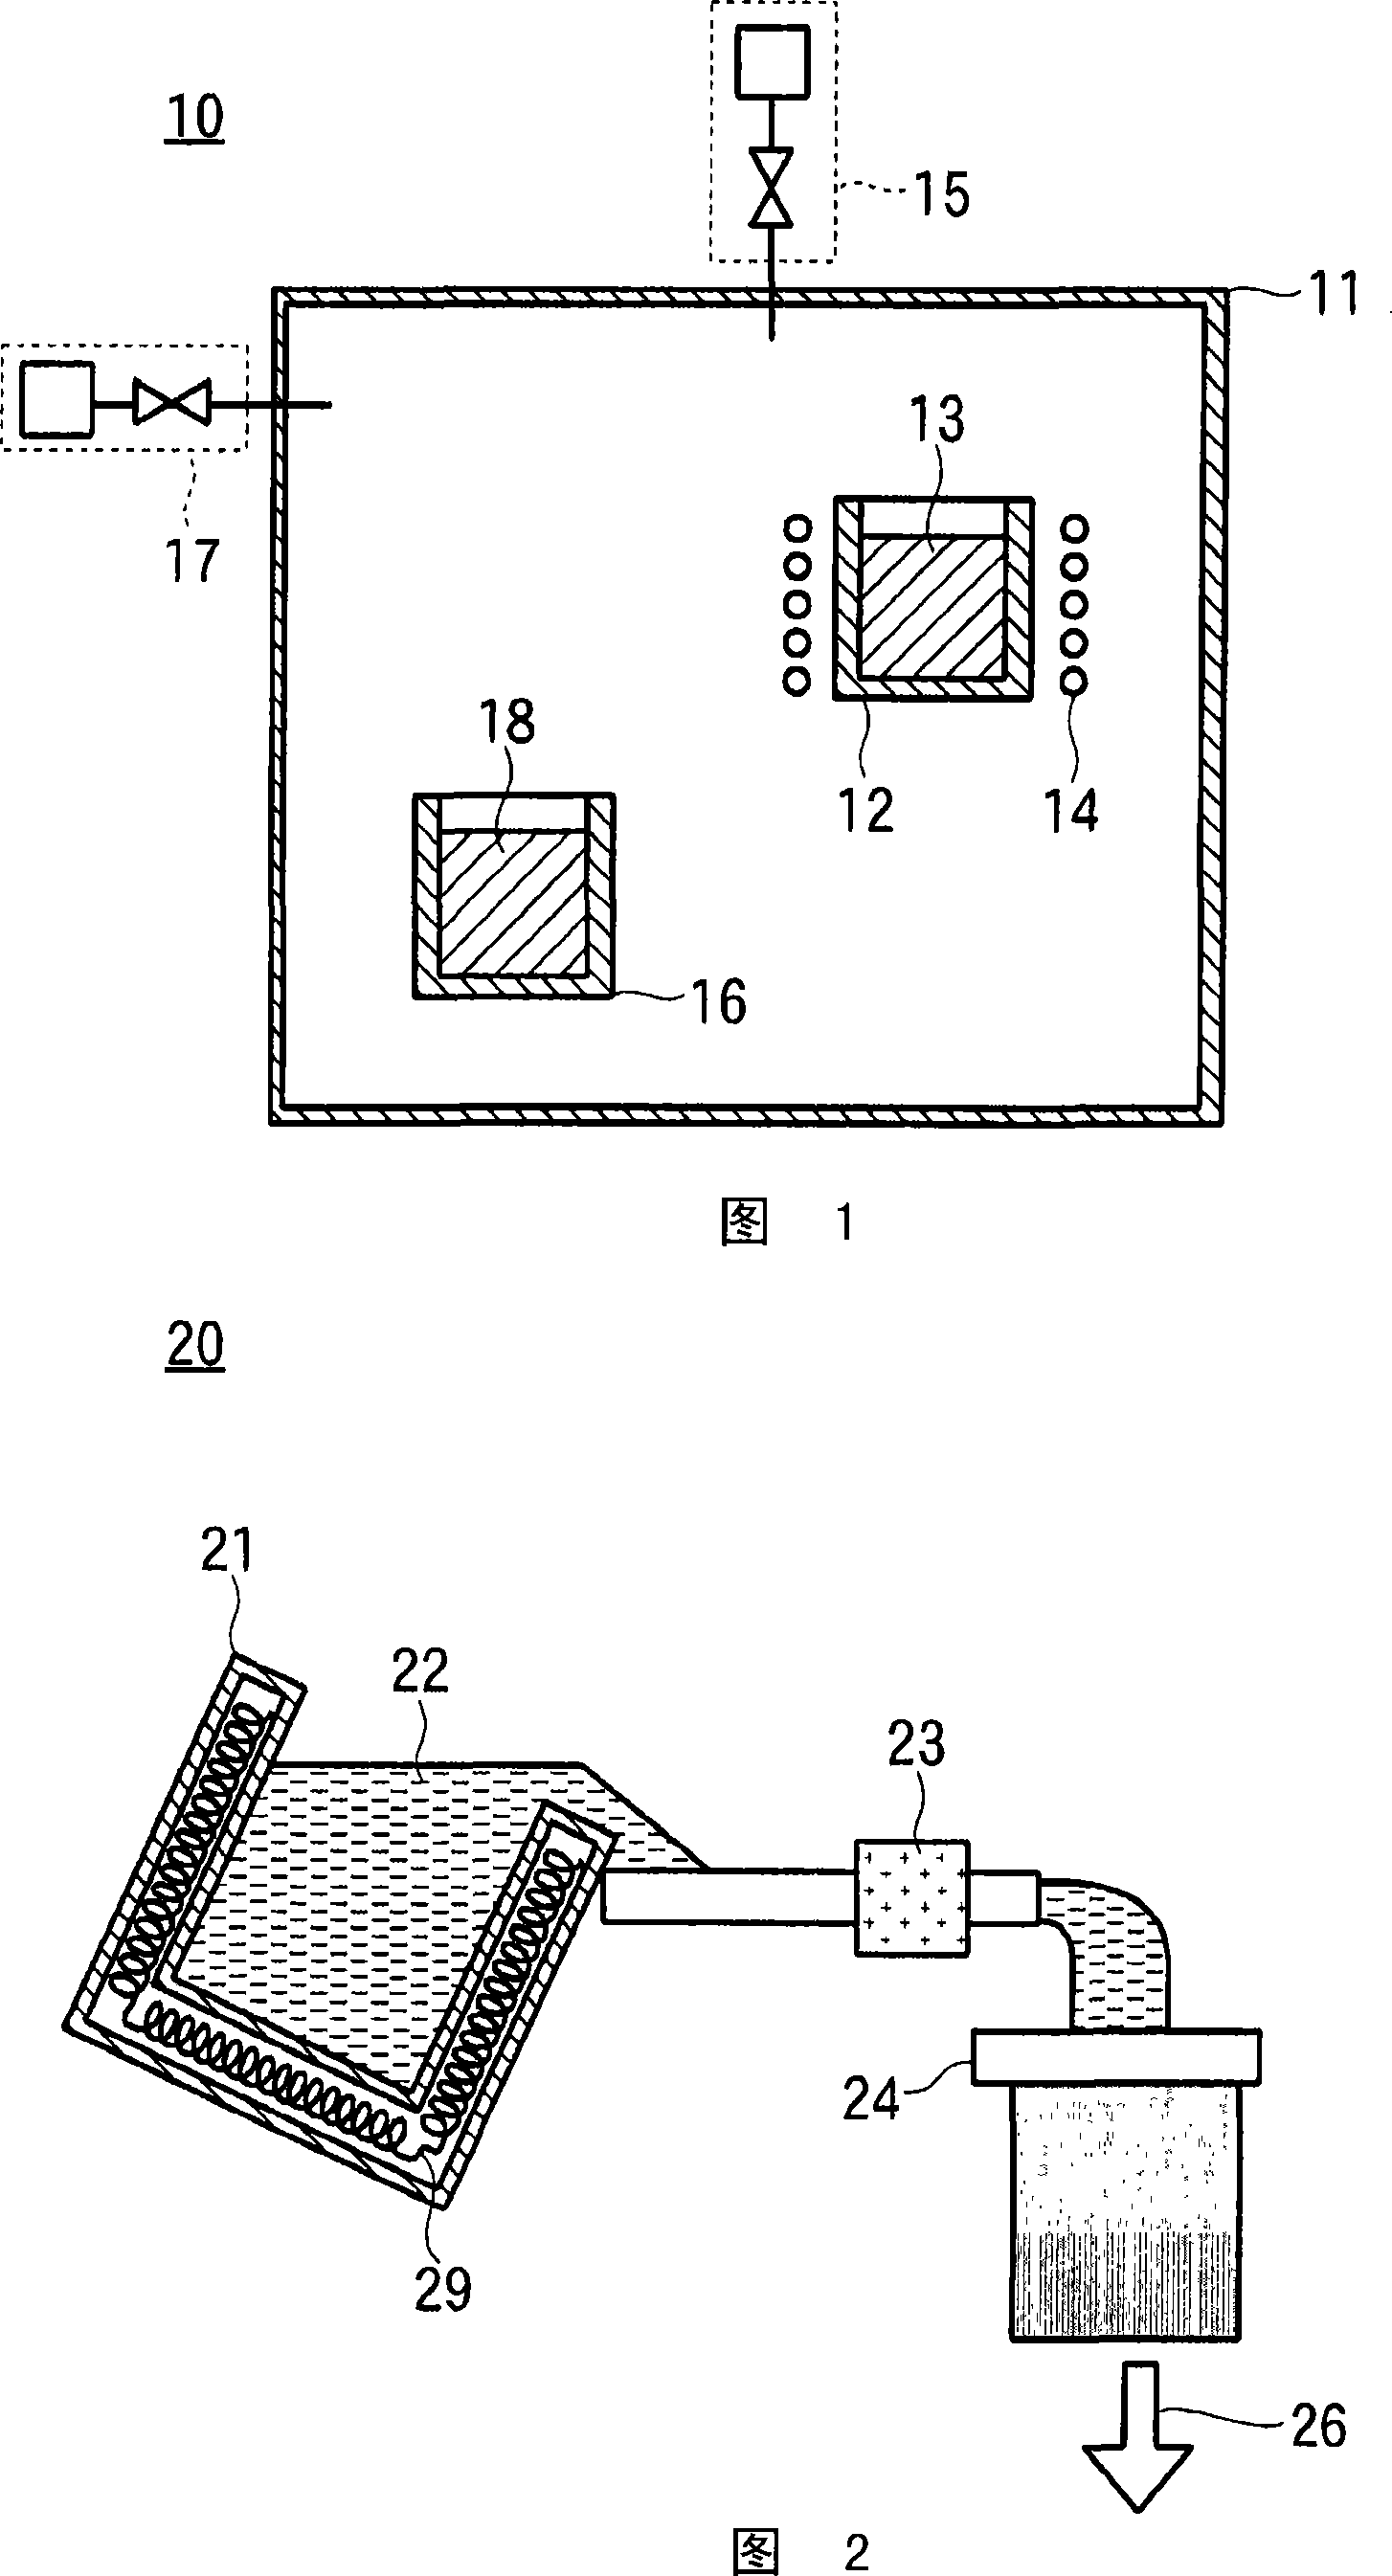 Method for producing a target